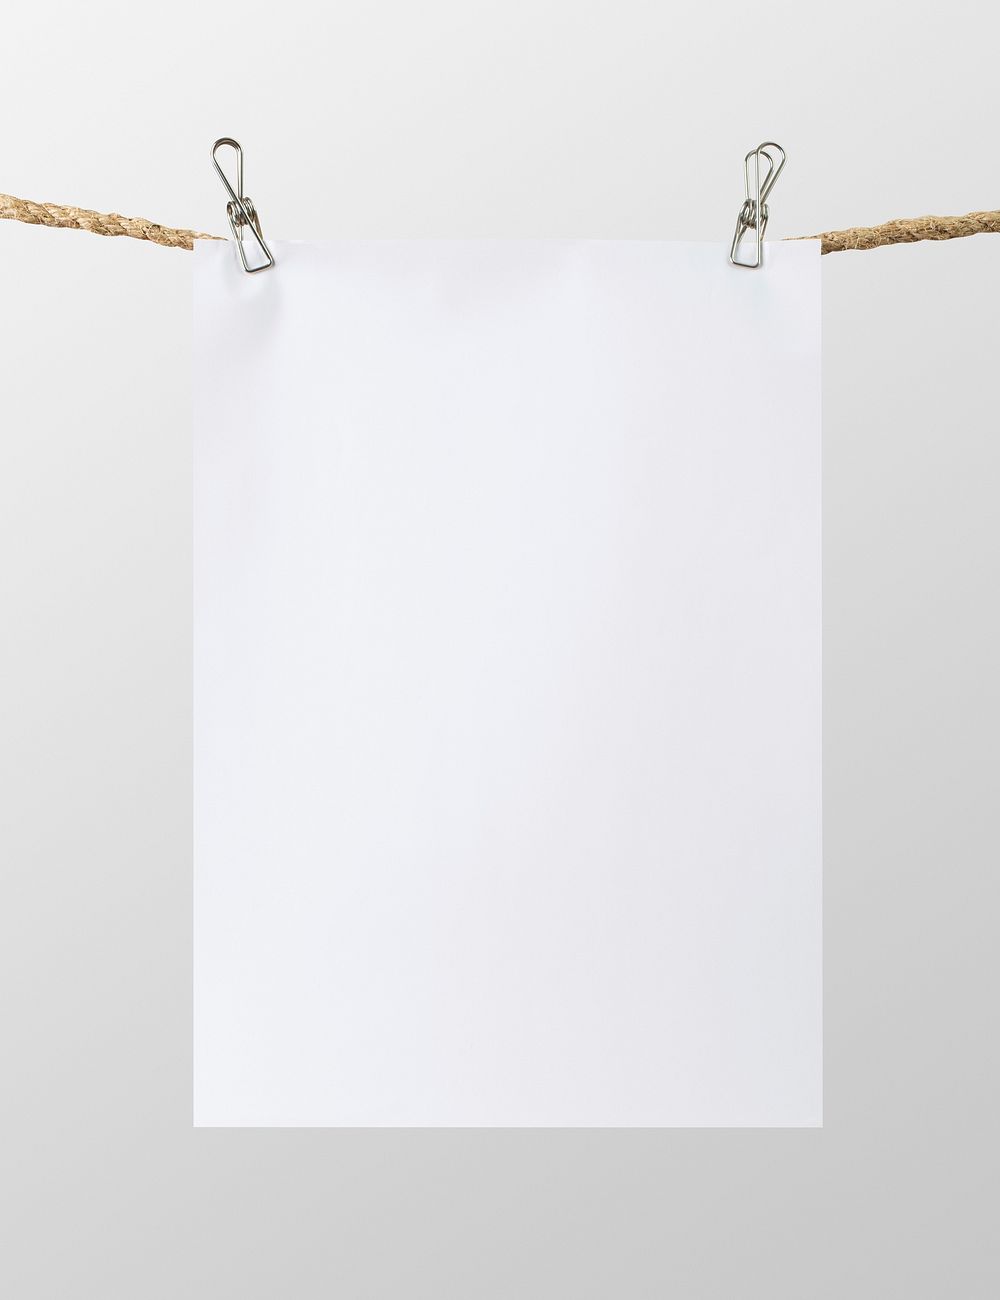 White poster, wall decoration in realistic design